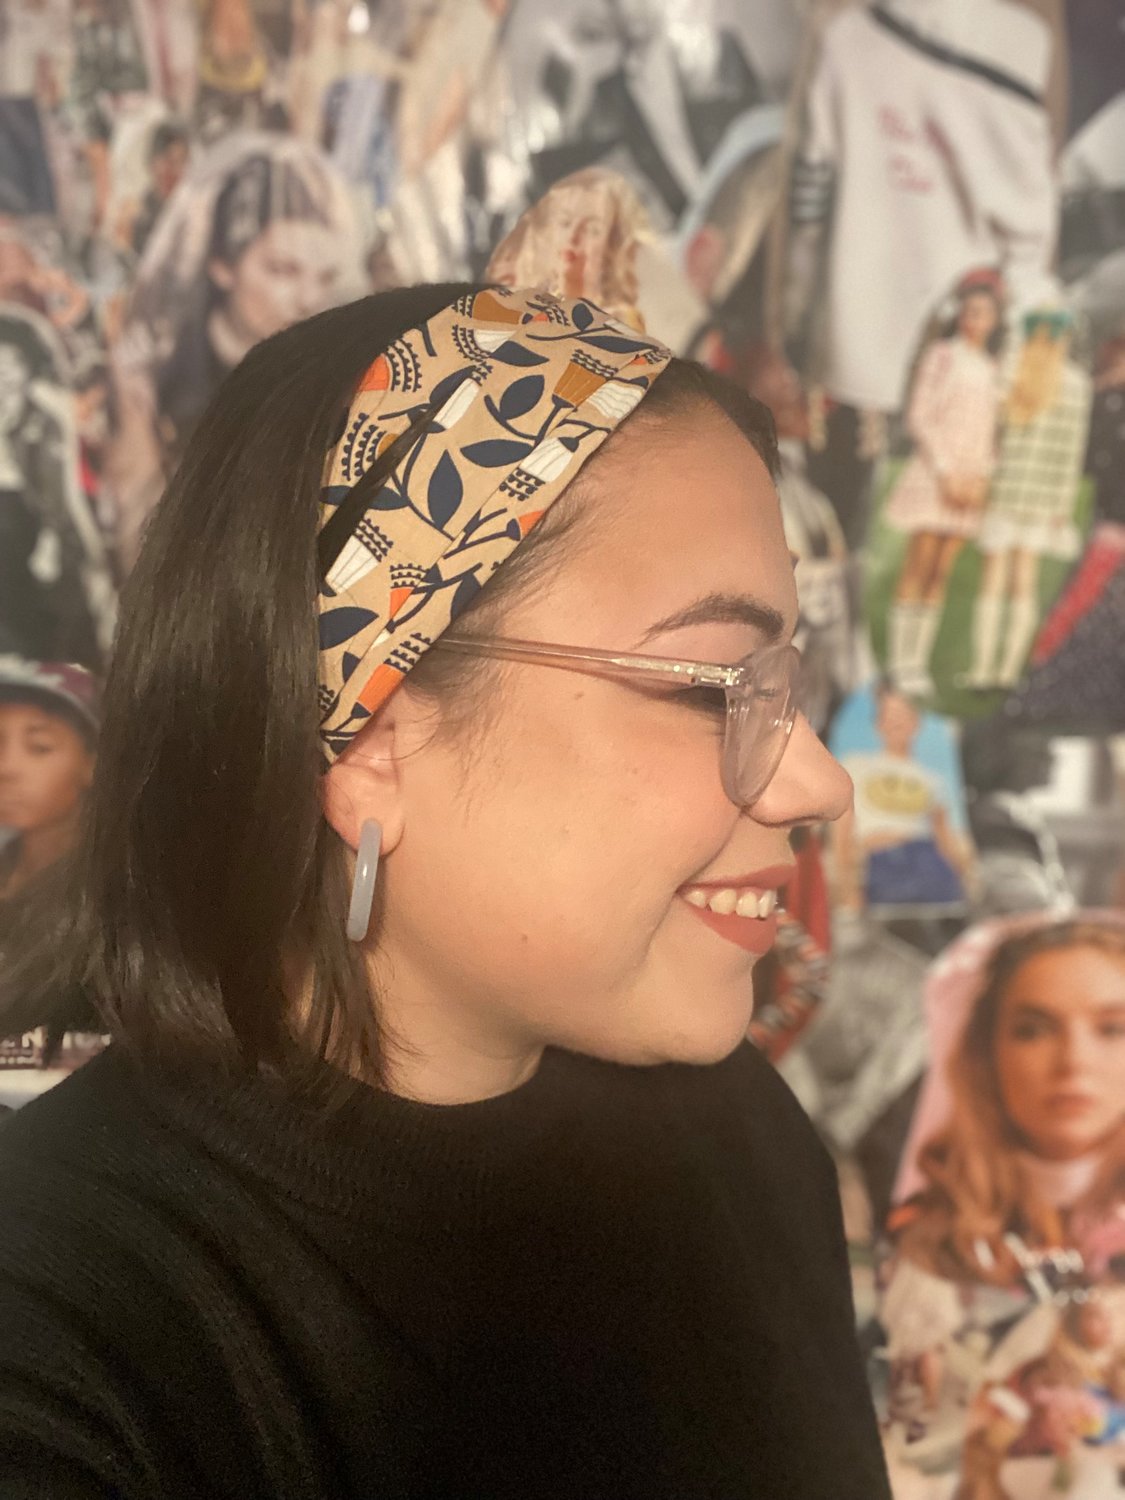 Reporter Mariana Dominguez shows off her new headband and earrings from Origin of Era in Bay Shore.